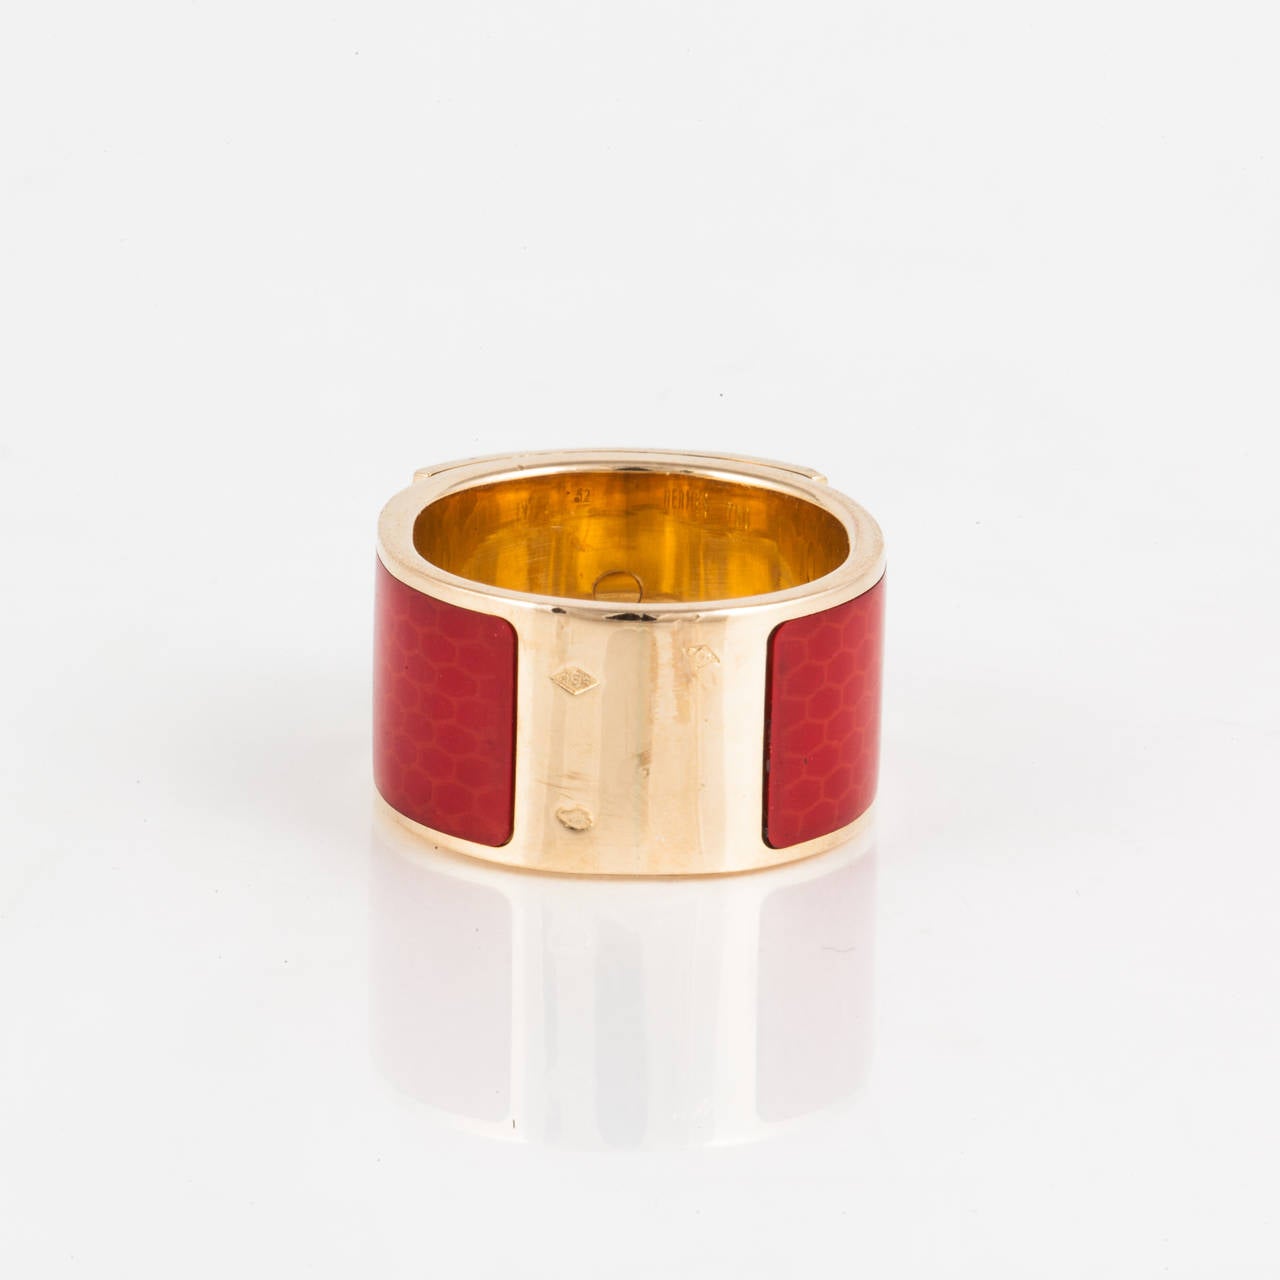 This ring by Hermes is from the Collier De Chien collection.  It features red enamel on 18K yellow gold. The inside of the band is marked 